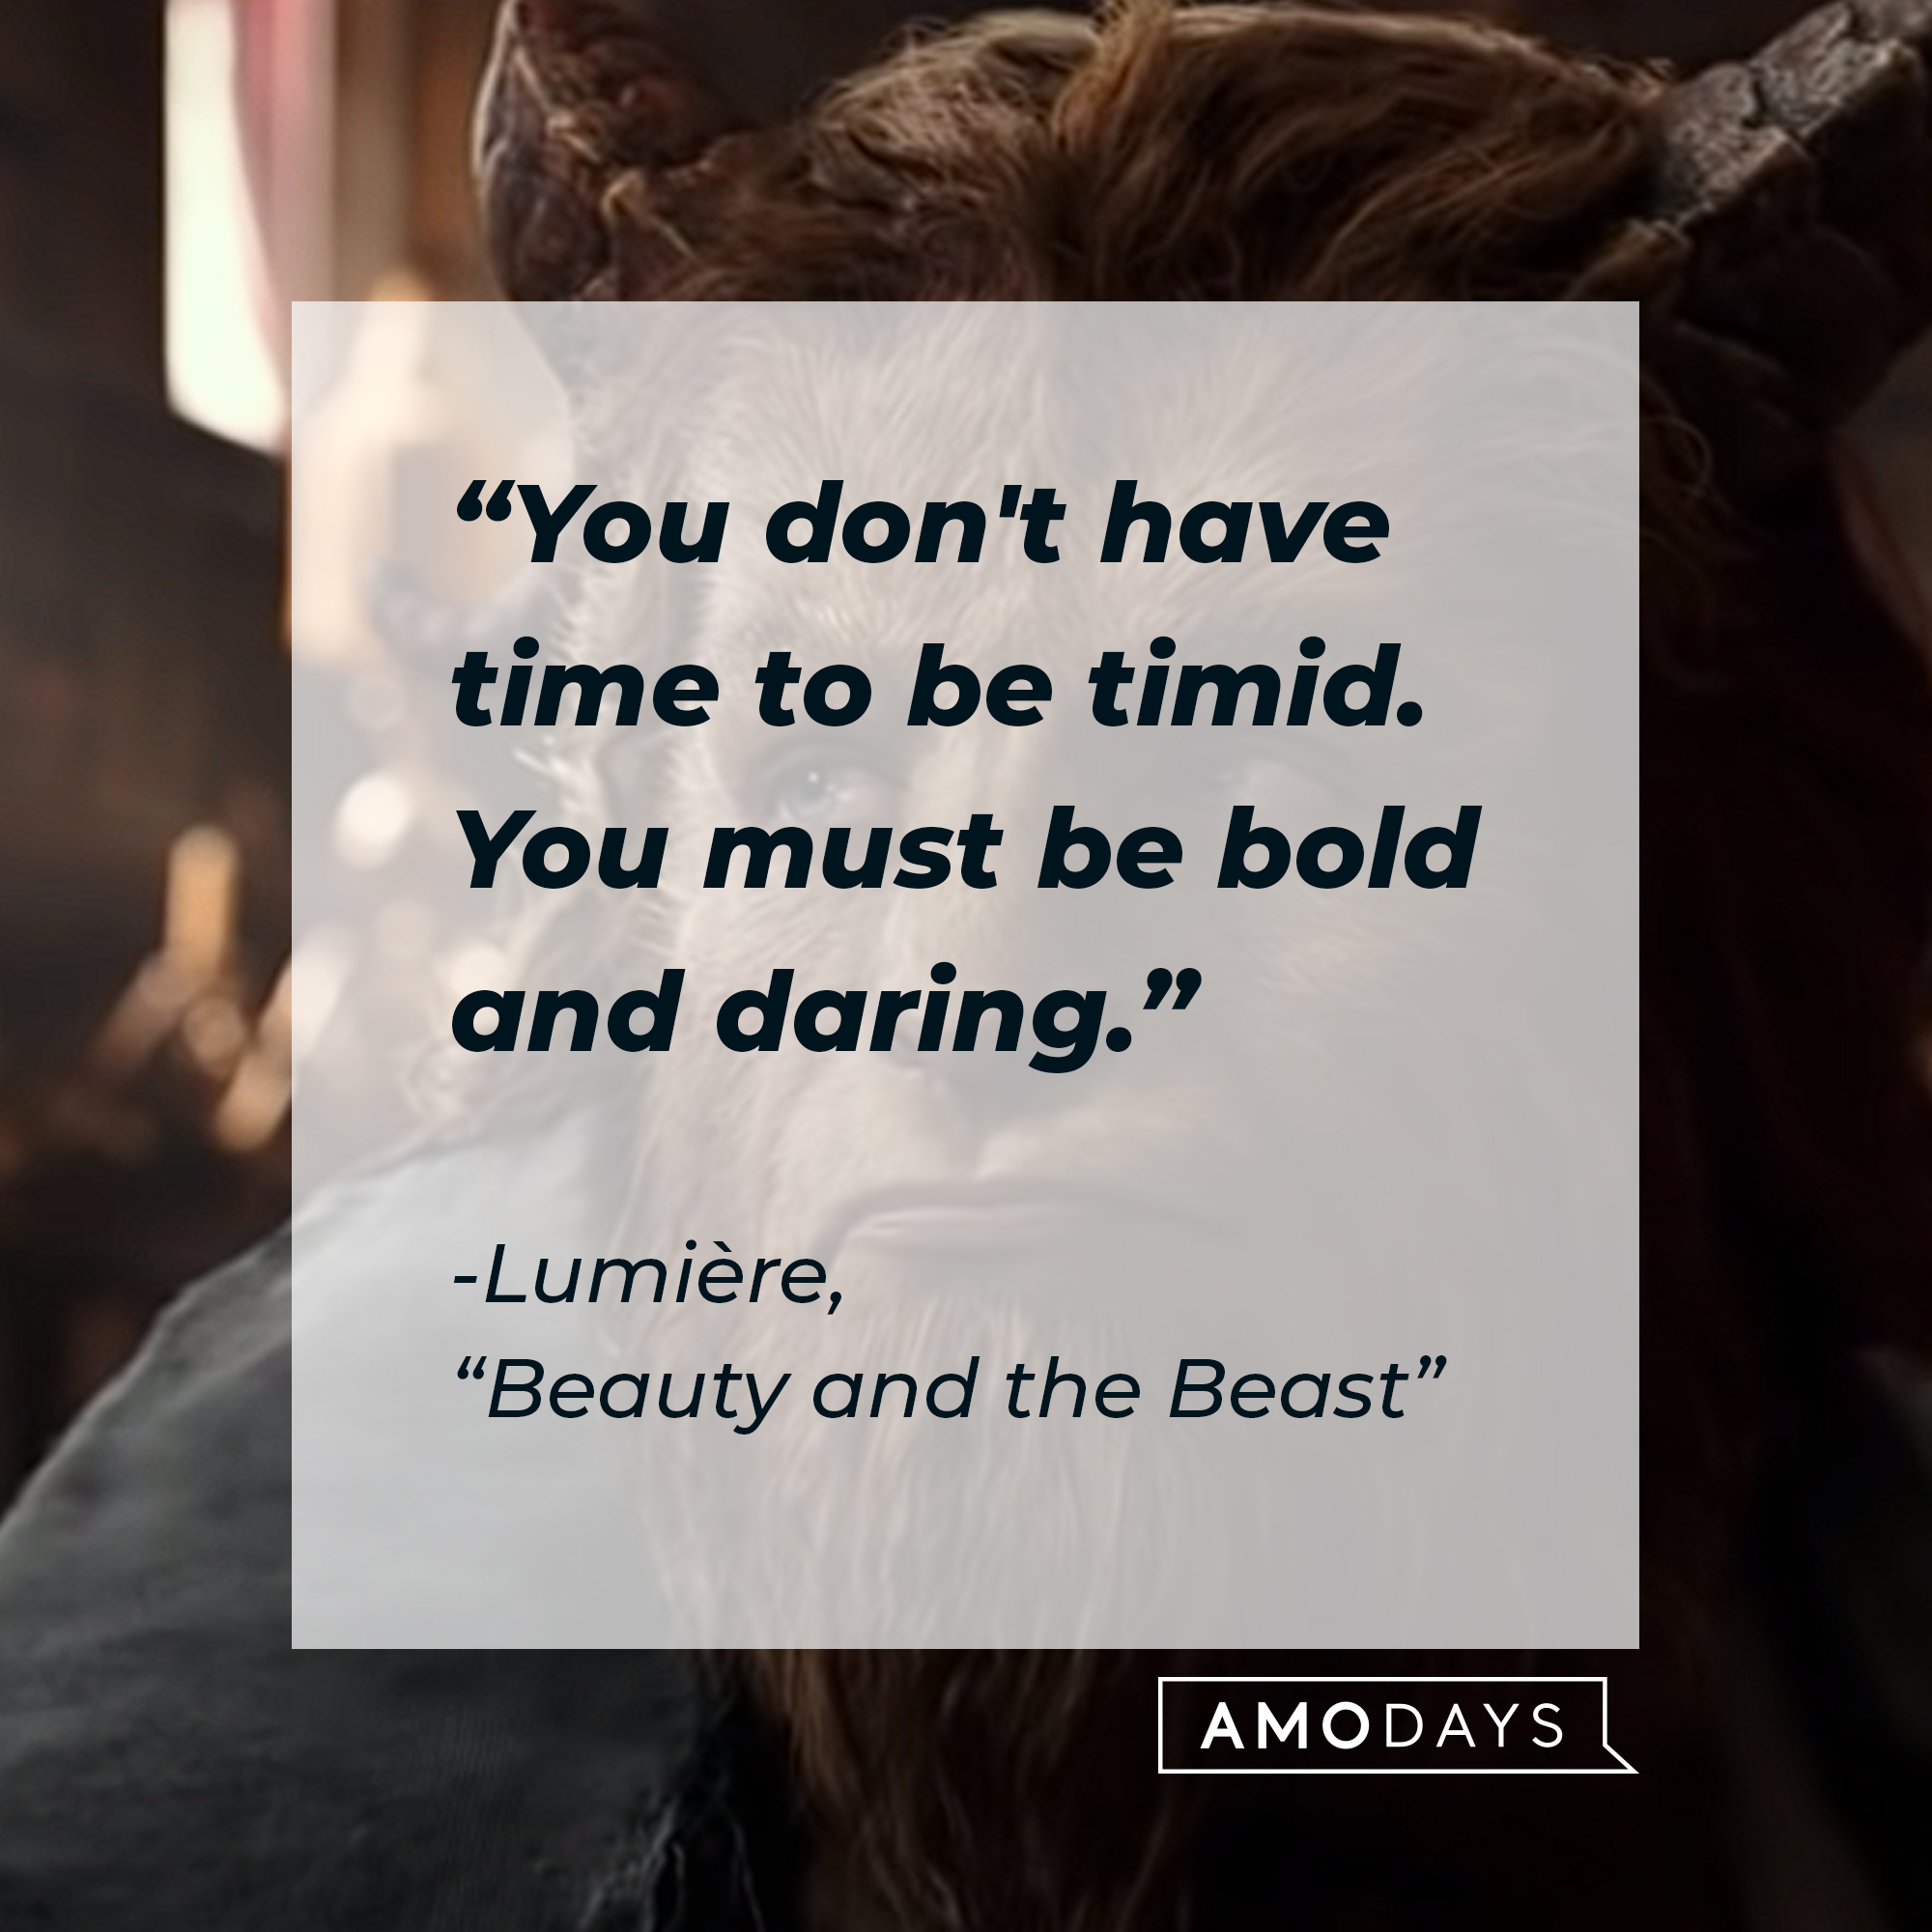 Lumière's "Beauty and the Beast" quote: "You don't have time to be timid. You must be bold and daring." | Source: Youtube.com/DisneyMovieTrailers